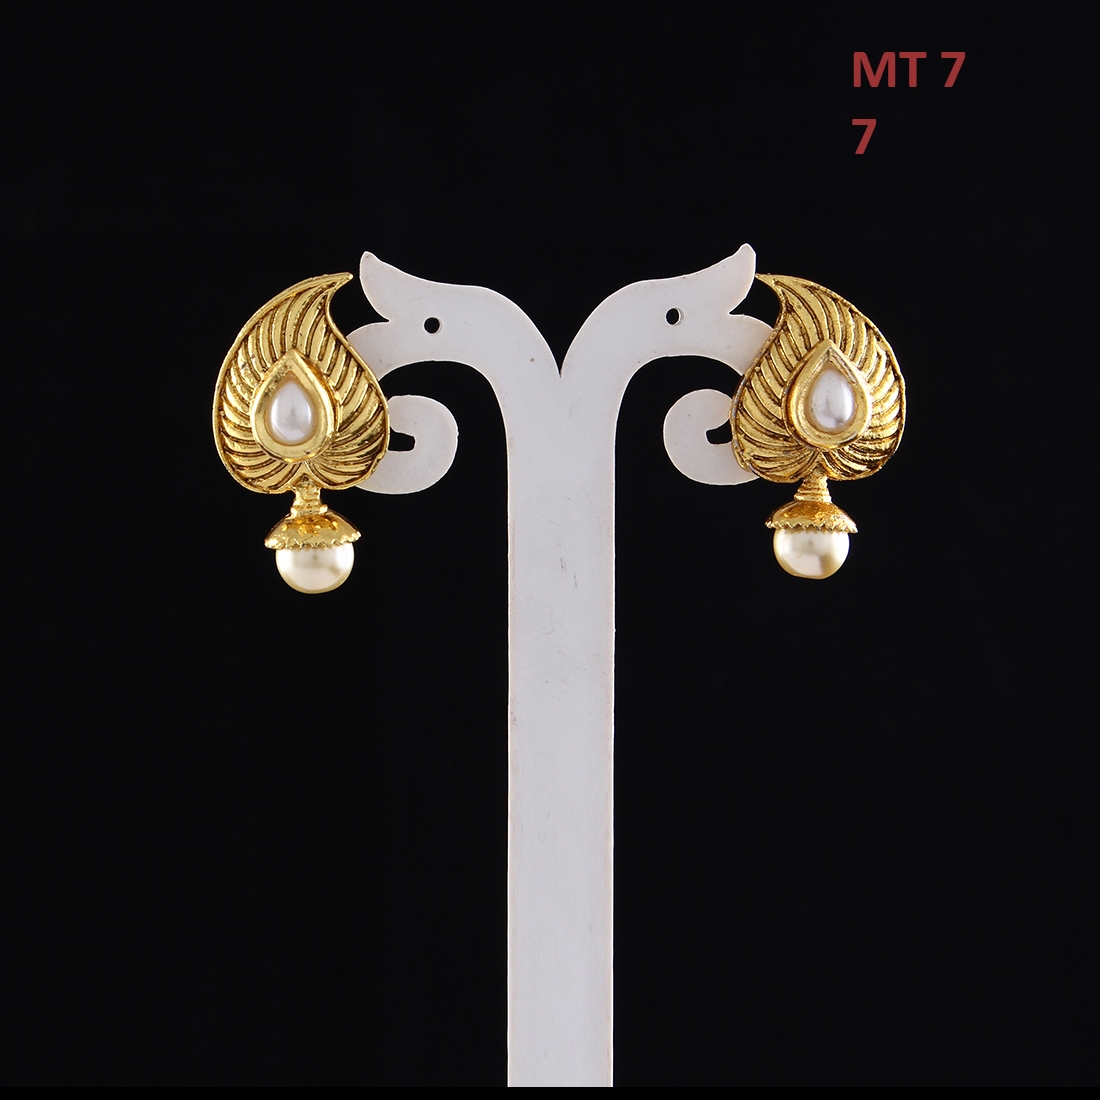 55Carat | Pretty Jhumki Earrings Gold Plated Crystal, Cz, Pearl Crystal, Cz, Pearl For Women Girls Ladies